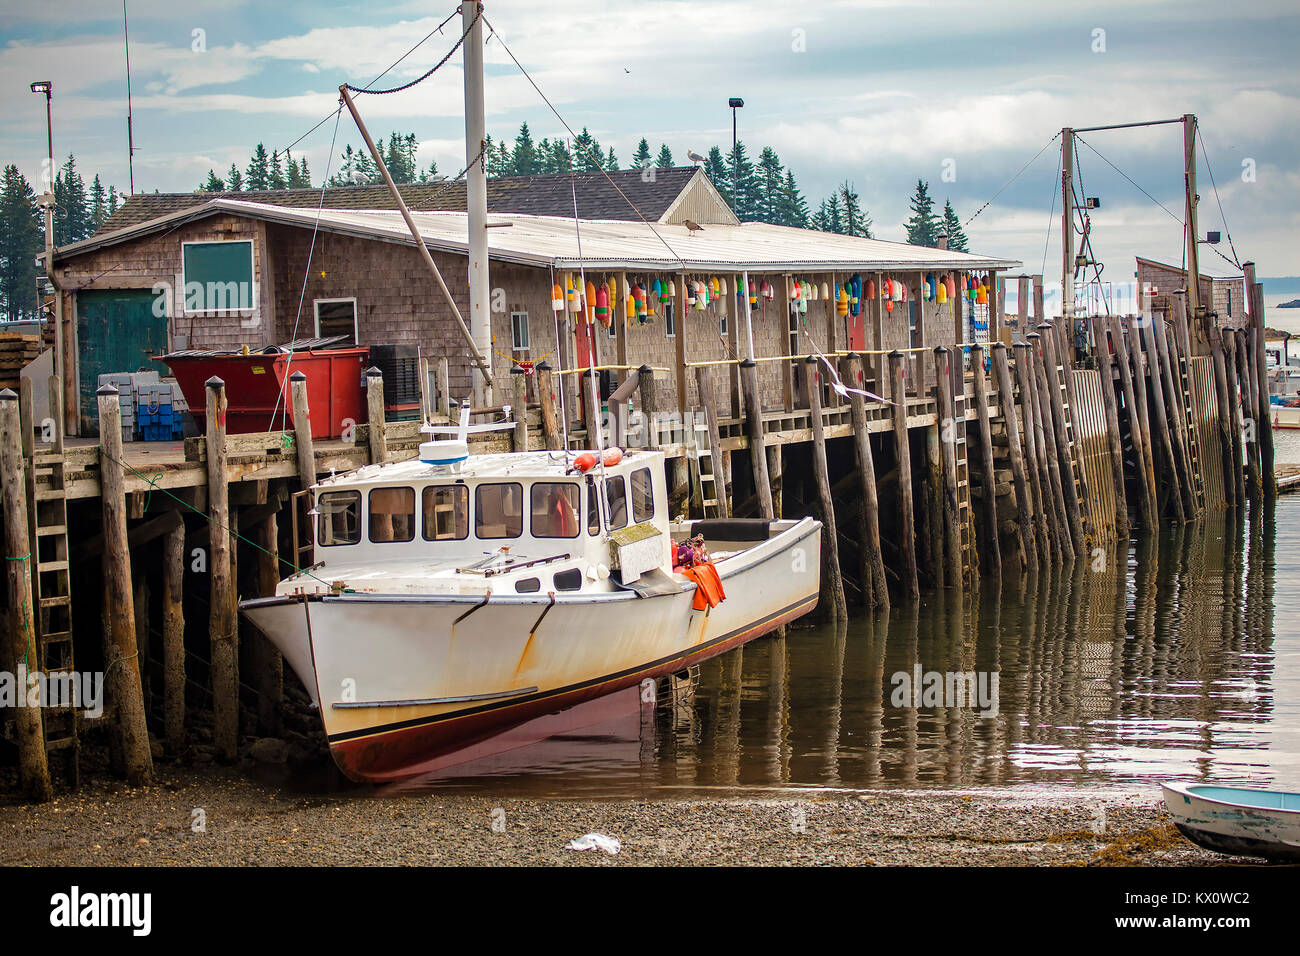 Lobster fishing trawler dry docked at a pier during low tide in Owl's Head, Maine, USA. Stock Photo